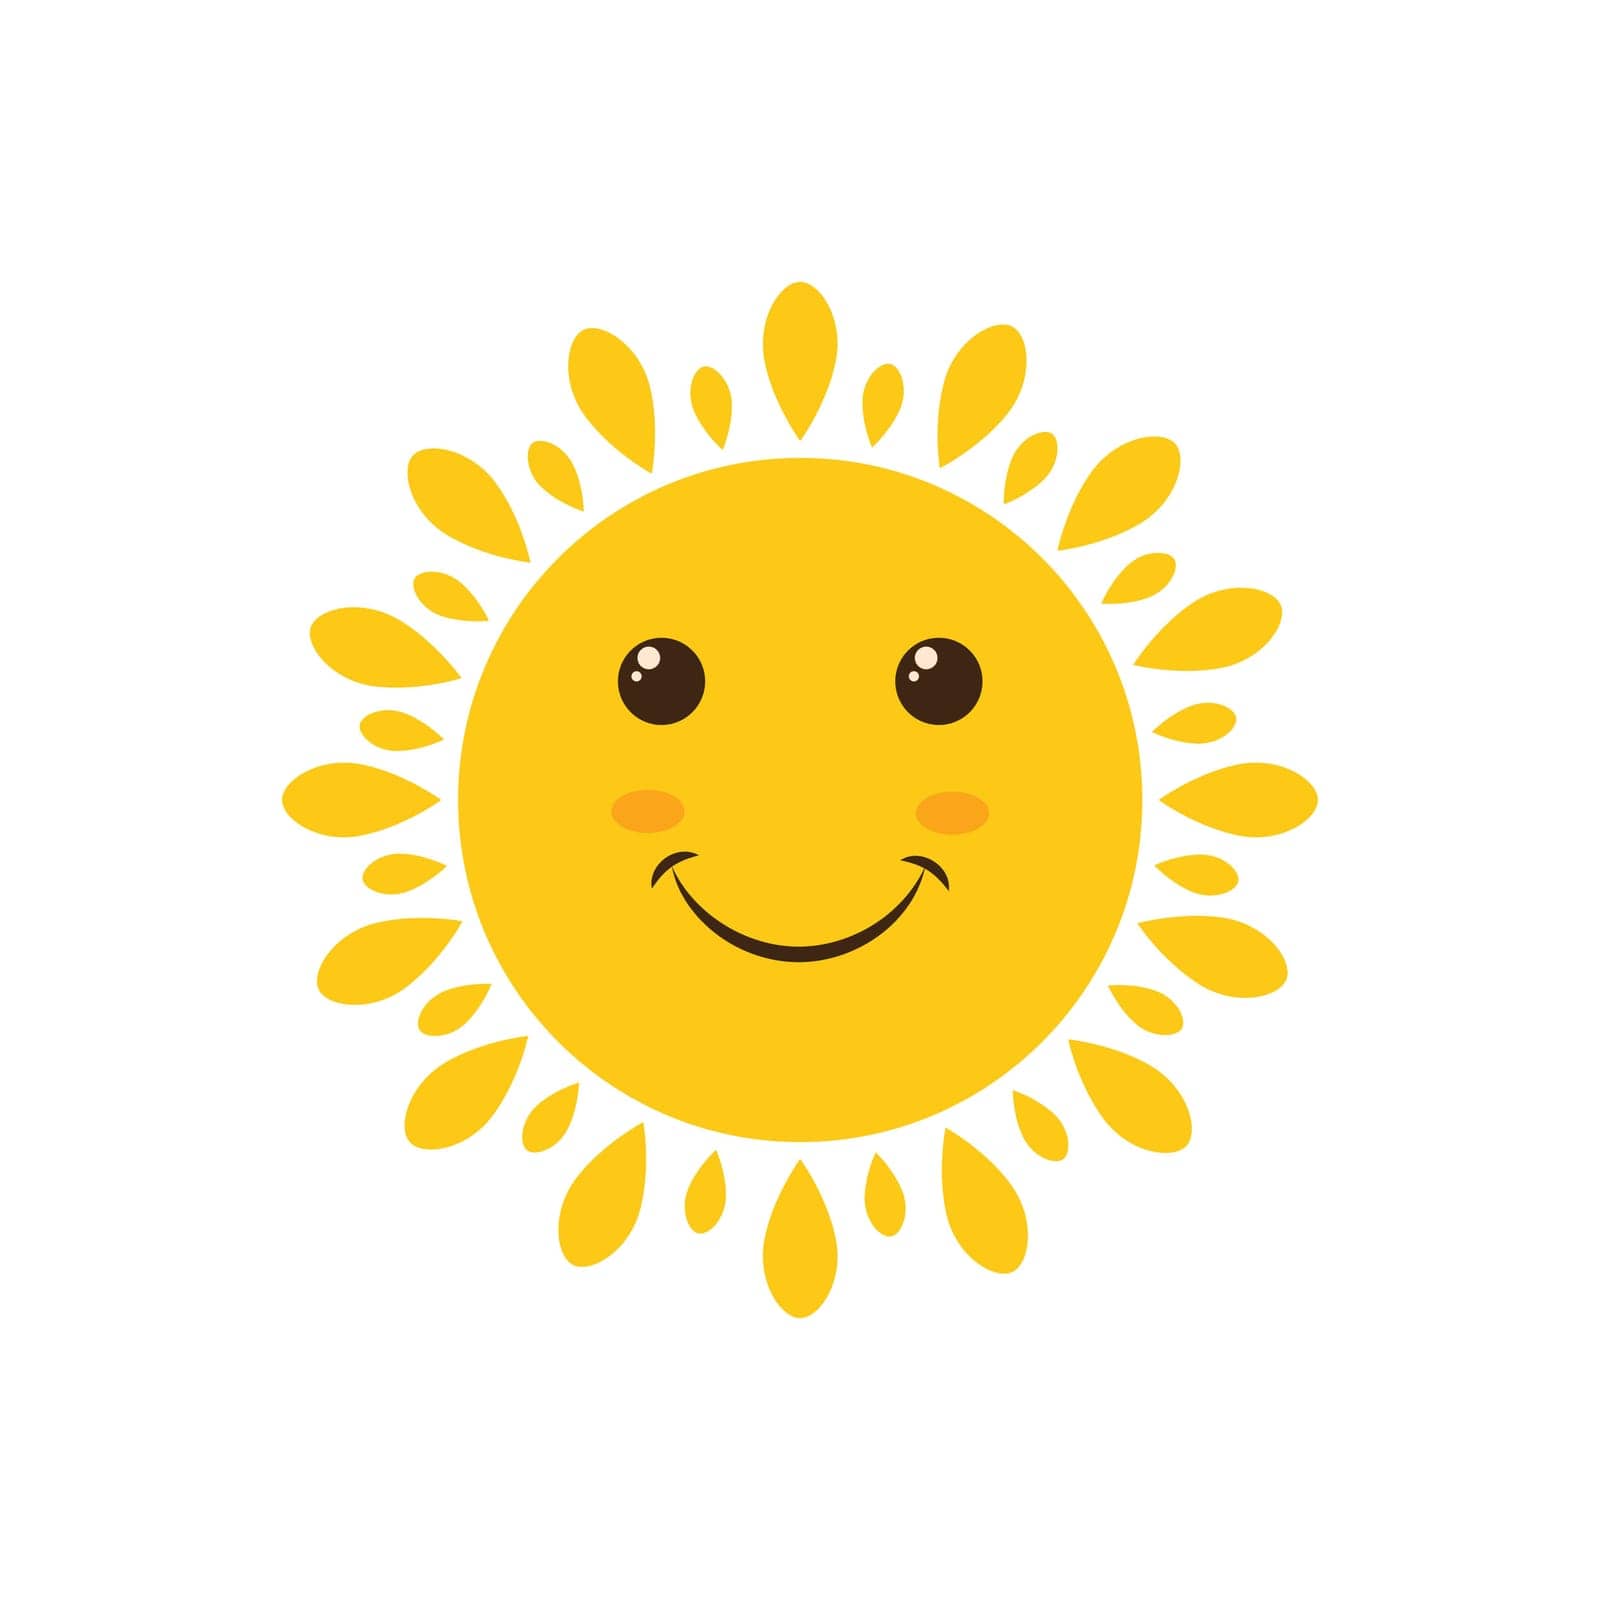 The sun. Vector positive illustration of a yellow smiling sun with joyful emotions, with beautiful rays. Icon. Cartoon children s vector image isolated on a white background. by NastyaN